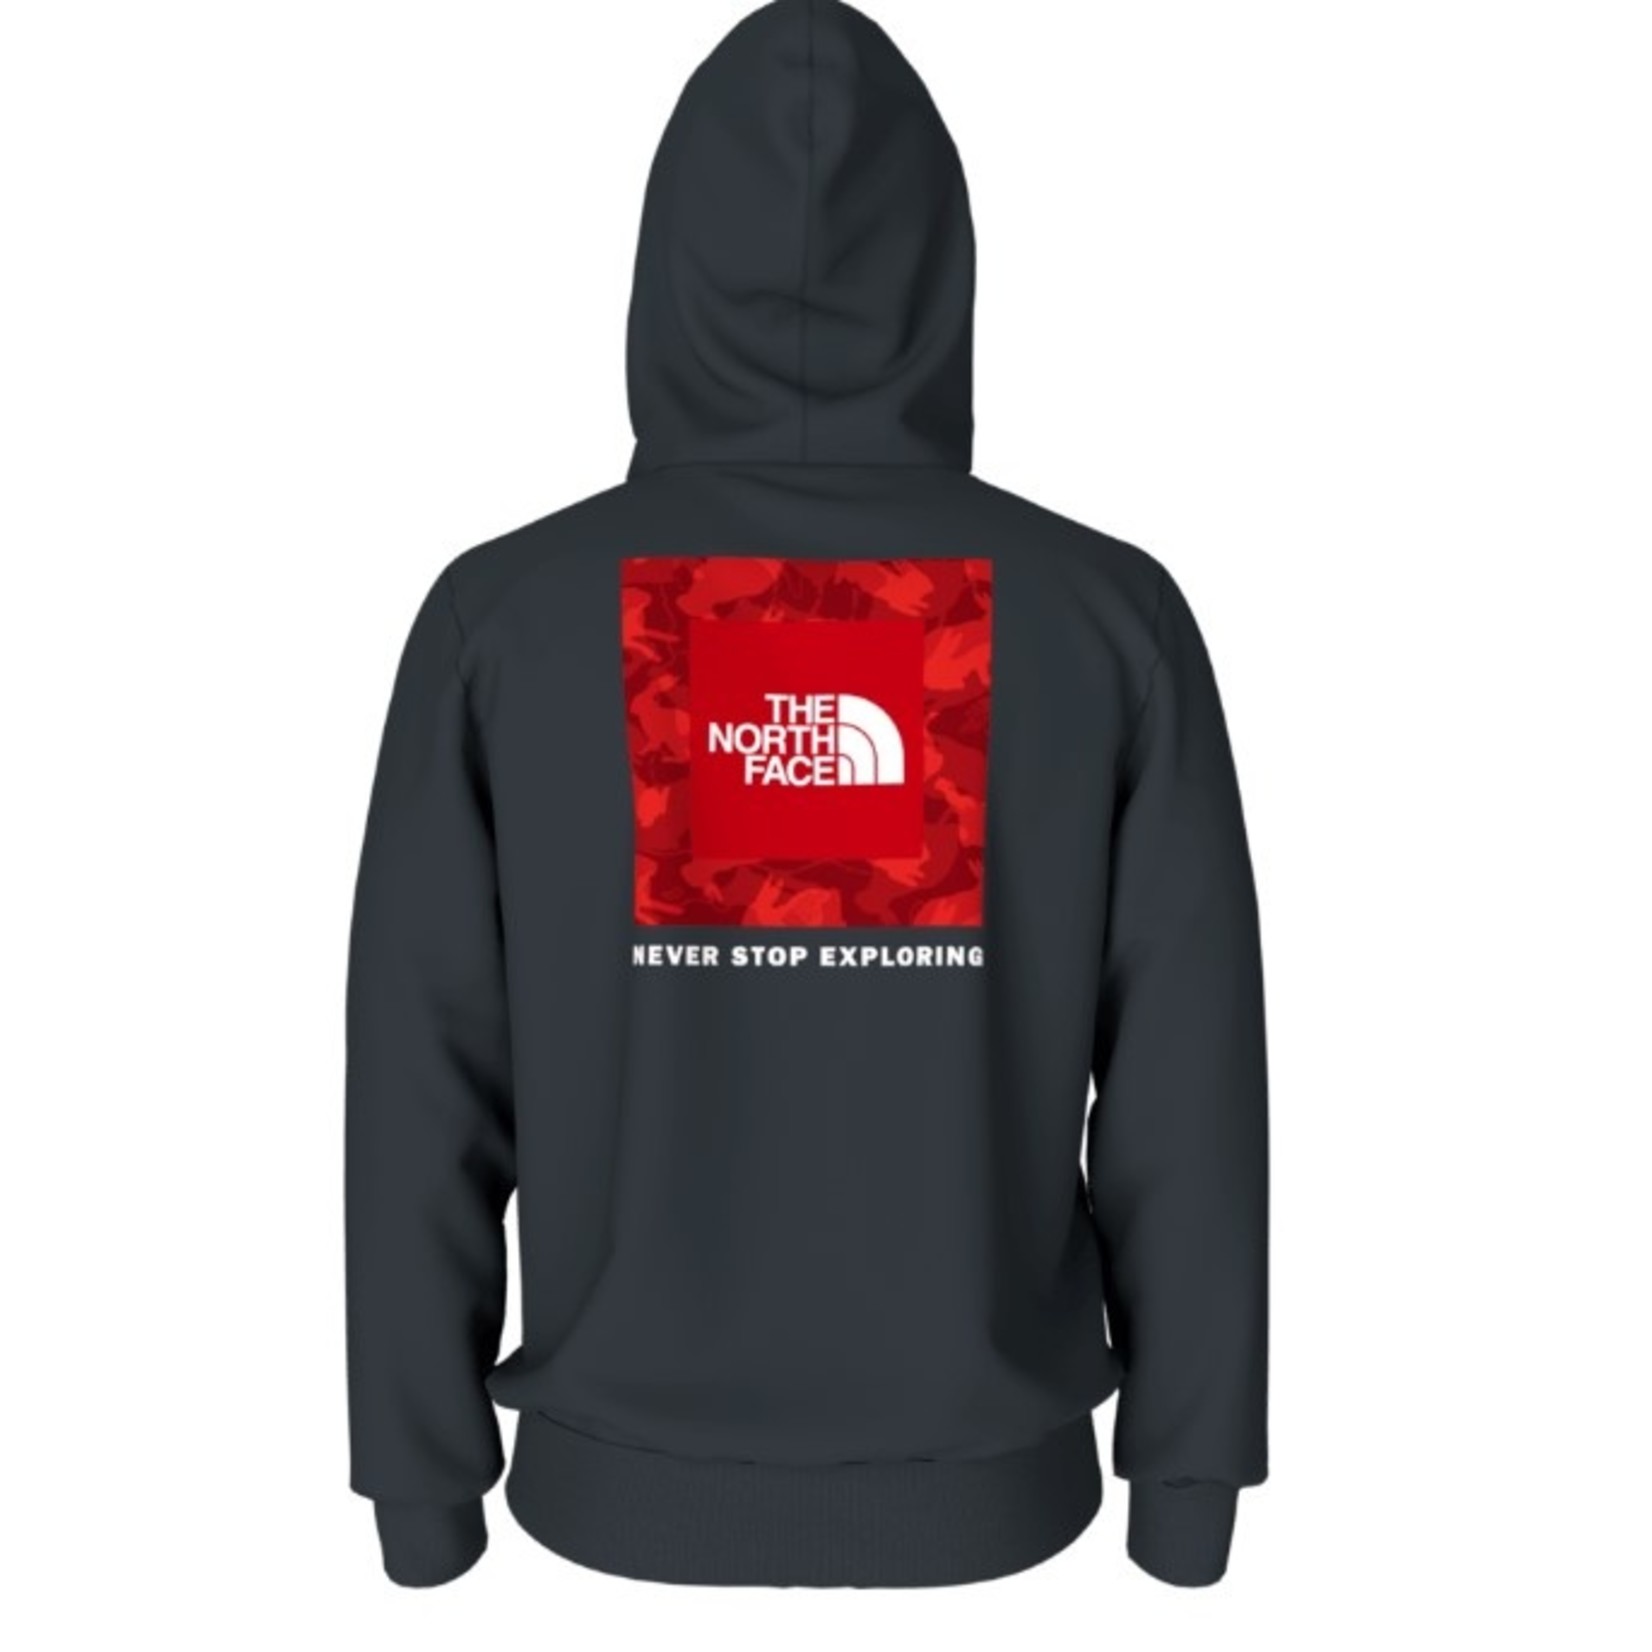 THE NORTH FACE Men's Lunar New Year Pullover Hoodie